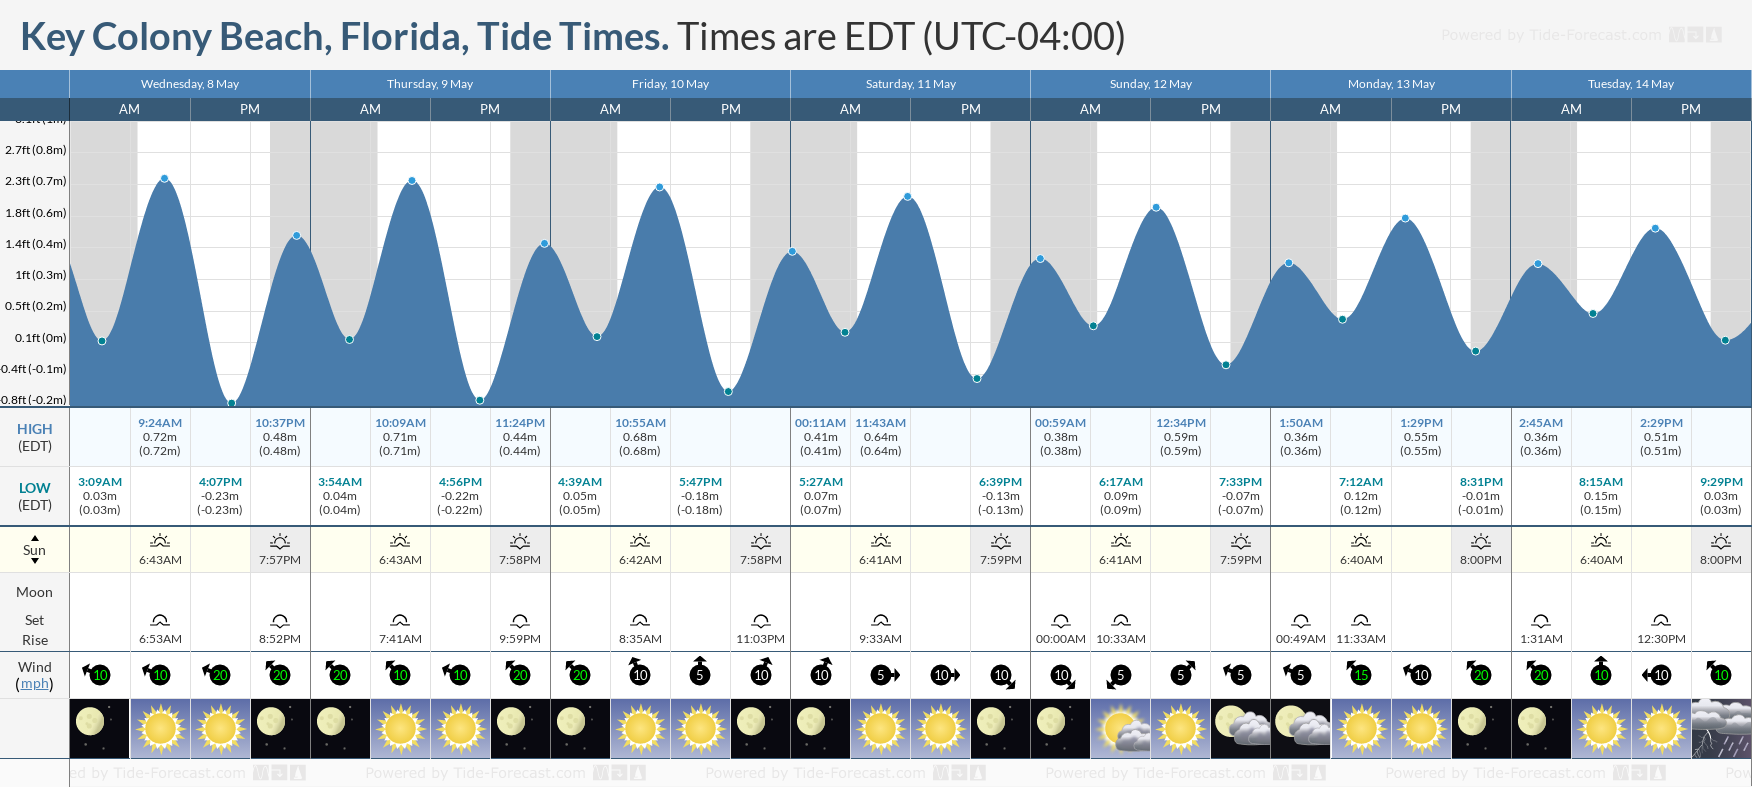 Key Colony Beach, Florida Tide Chart including high and low tide tide times for the next 7 days